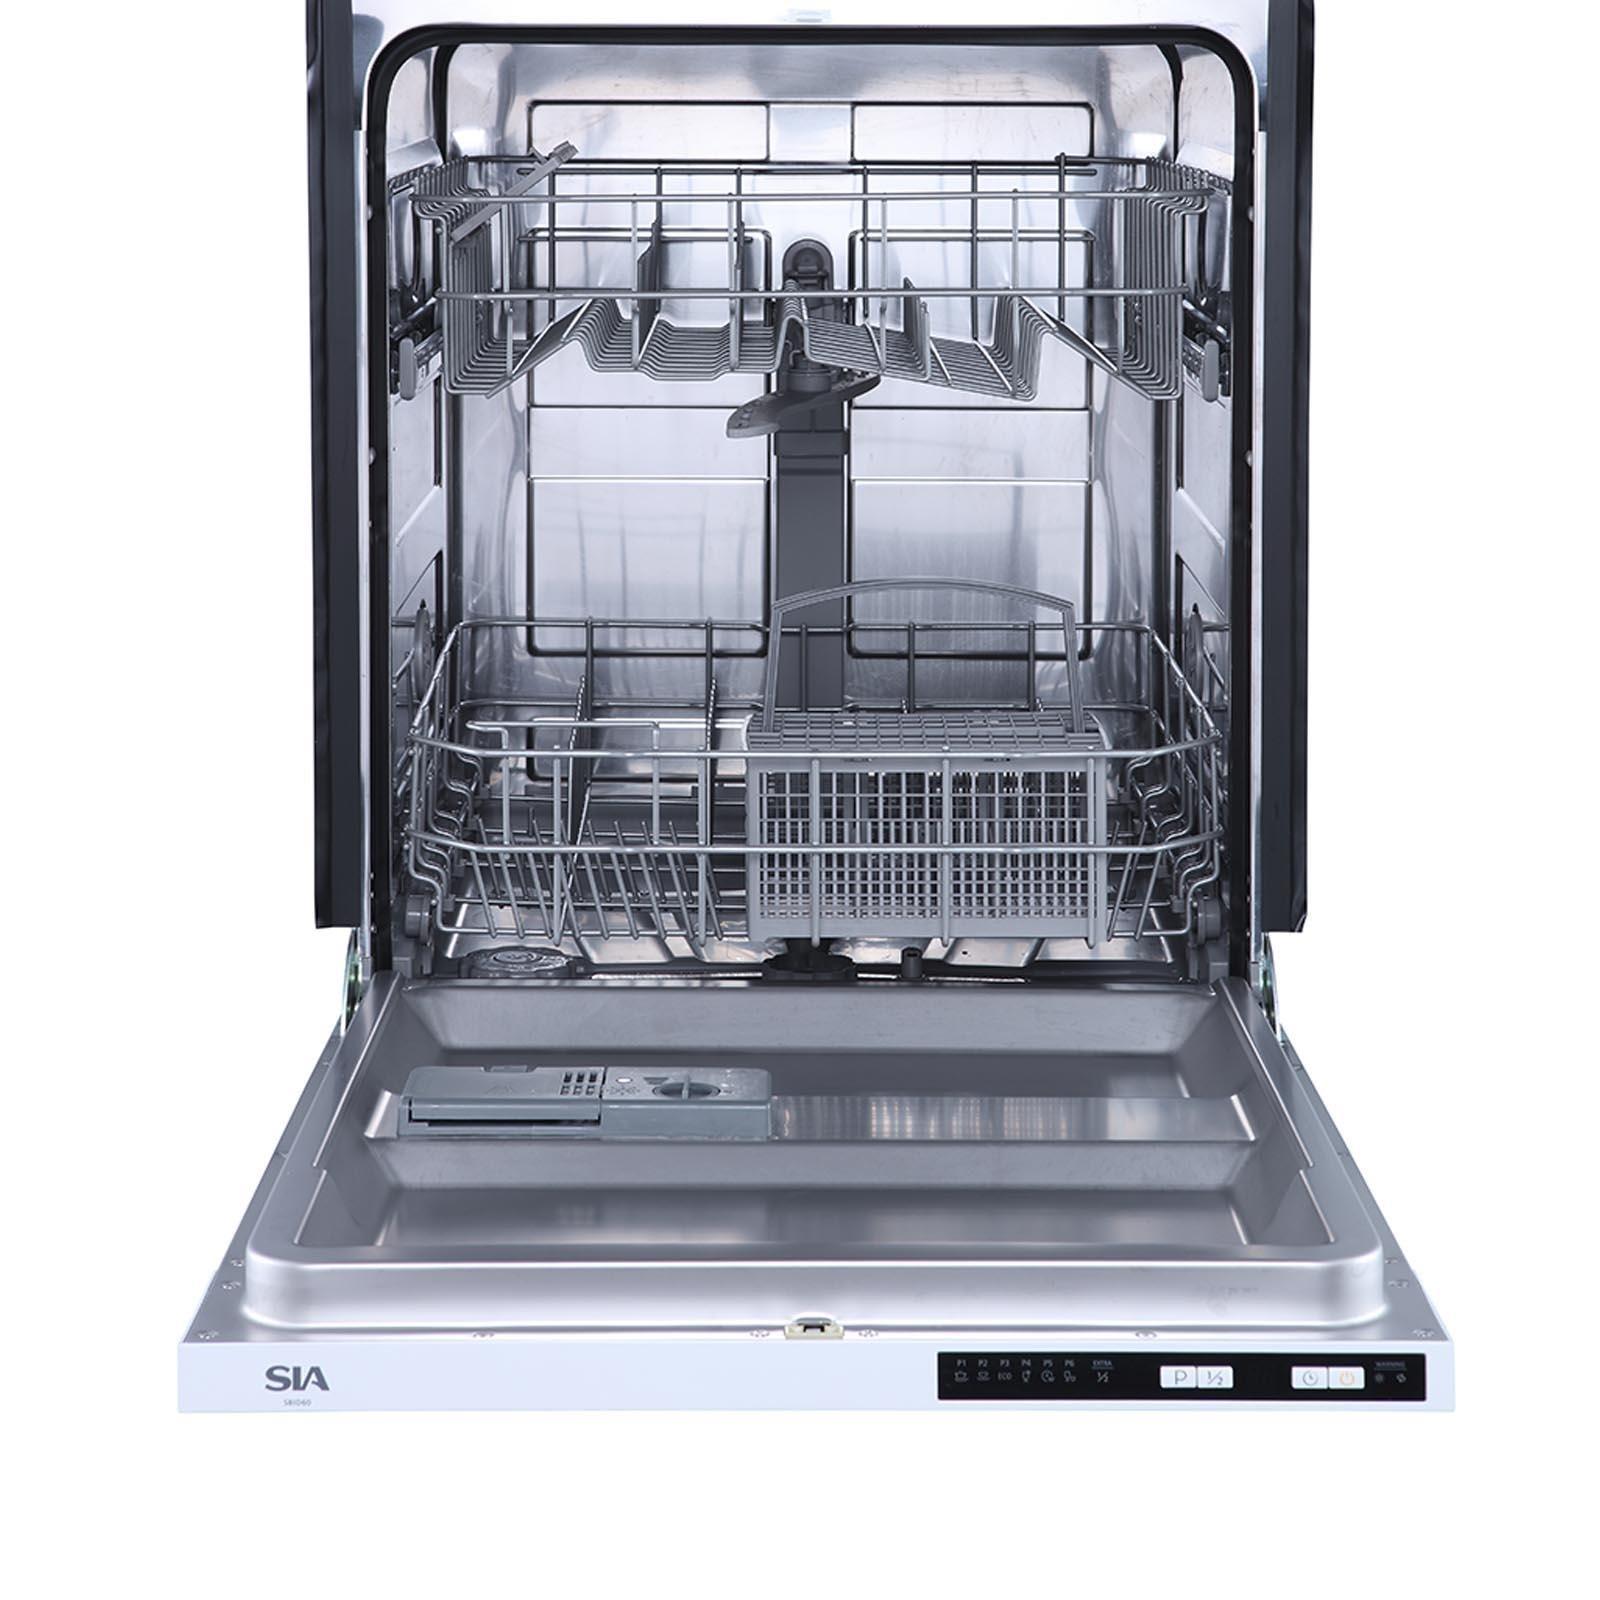 60cm Integrated Dishwasher, 12 Place Settings - SBID60